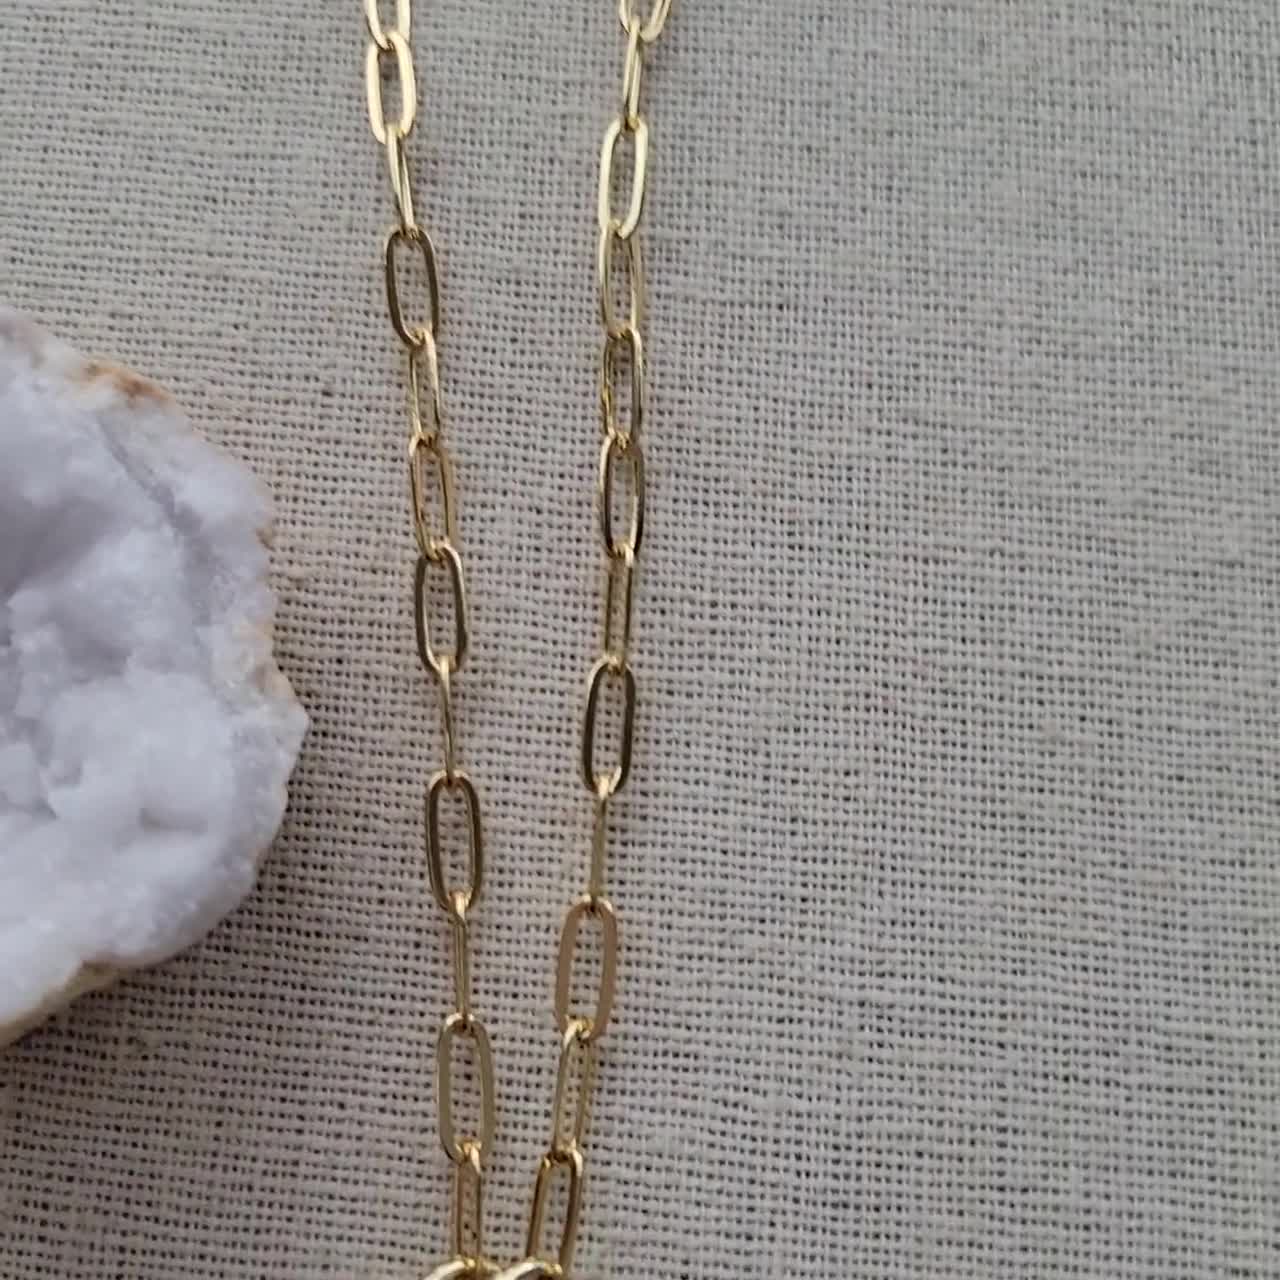 Double Carabiner Clasp Necklace, Gold Necklace, Gold Link Necklace, Gold  Carabiner Lock Necklace, Paperclip Link Chain Necklace,24kt 